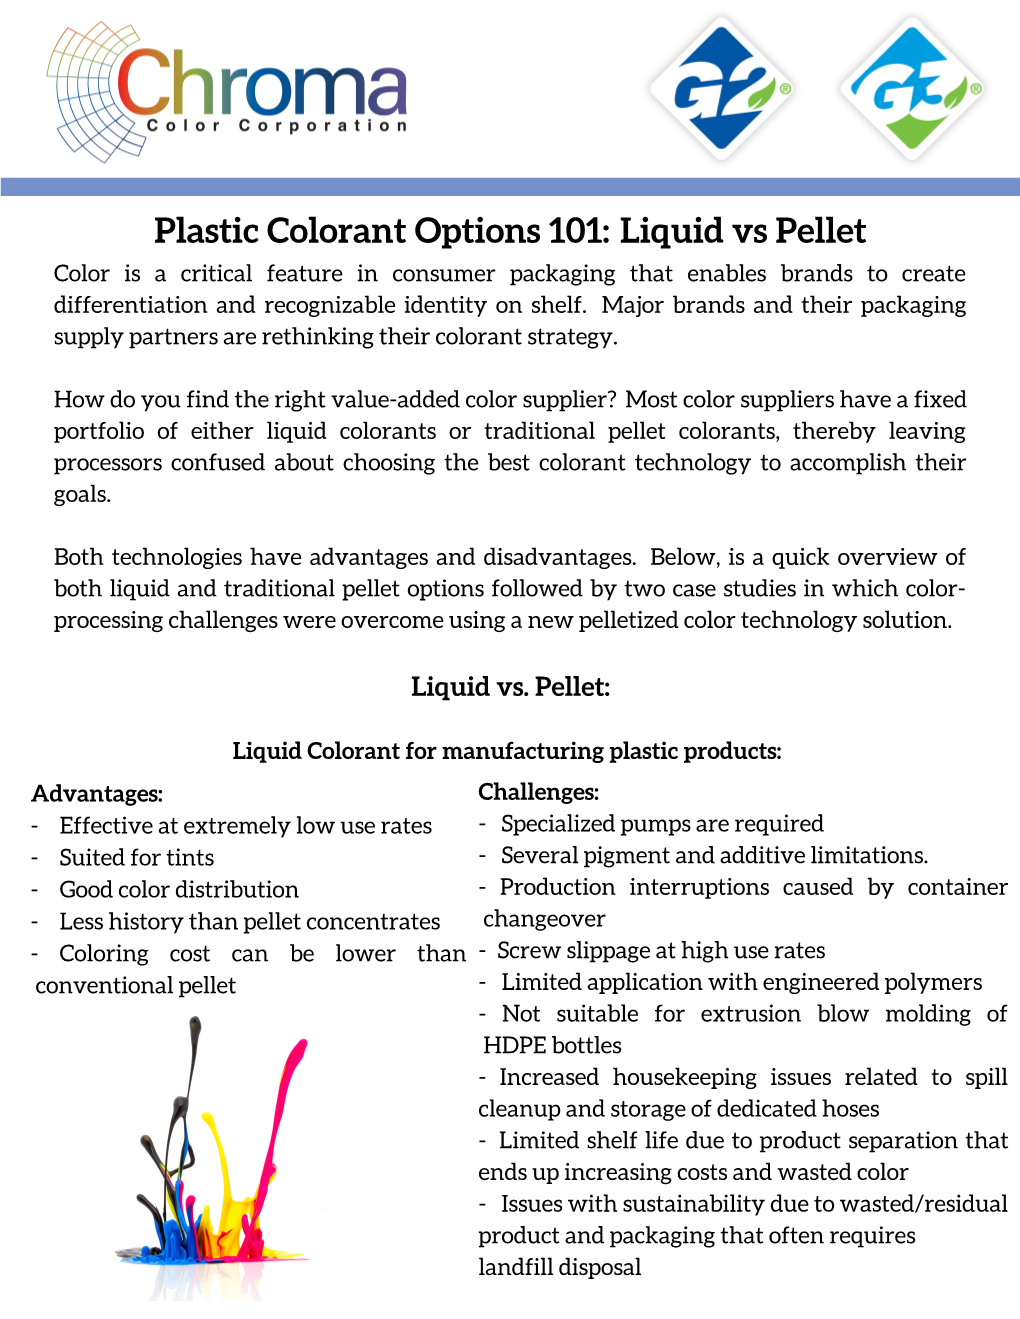 Liquid Vs Pellet Color Is a Critical Feature in Consumer Packaging That Enables Brands to Create Differentiation and Recognizable Identity on Shelf